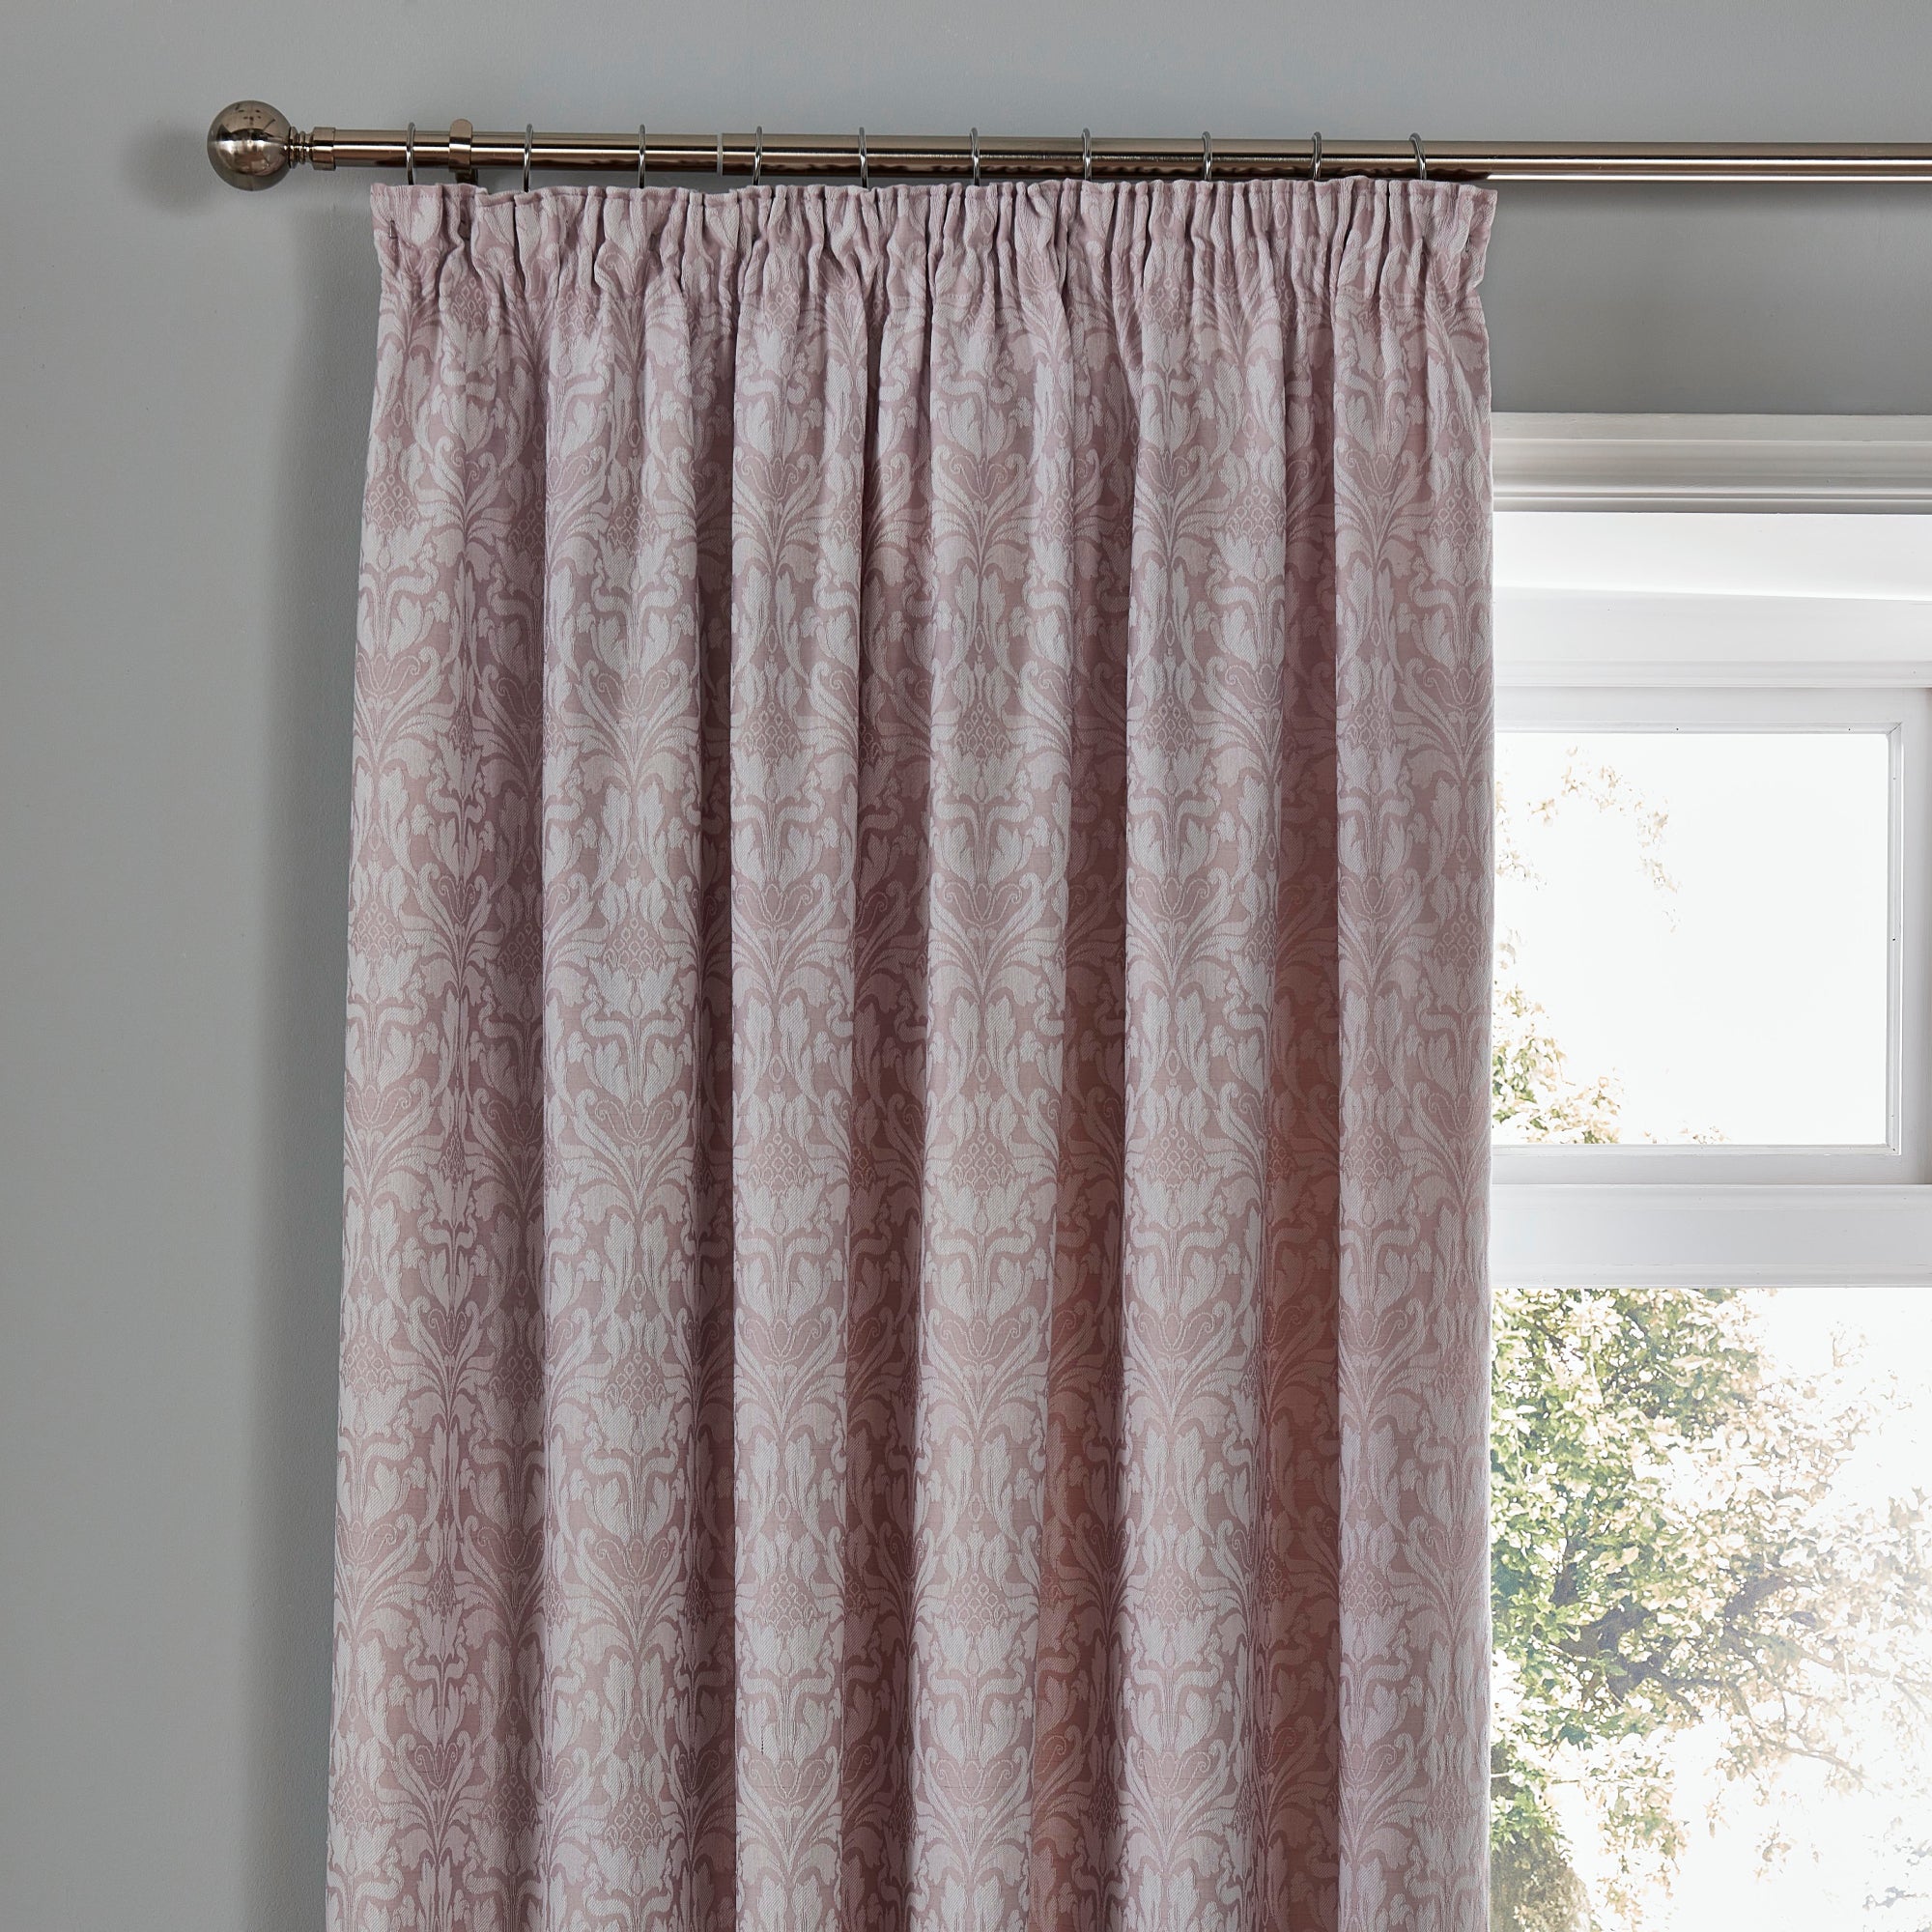 Woven Hawthorne Lavender Pair of Pencil Pleat Curtains With Tie Backs